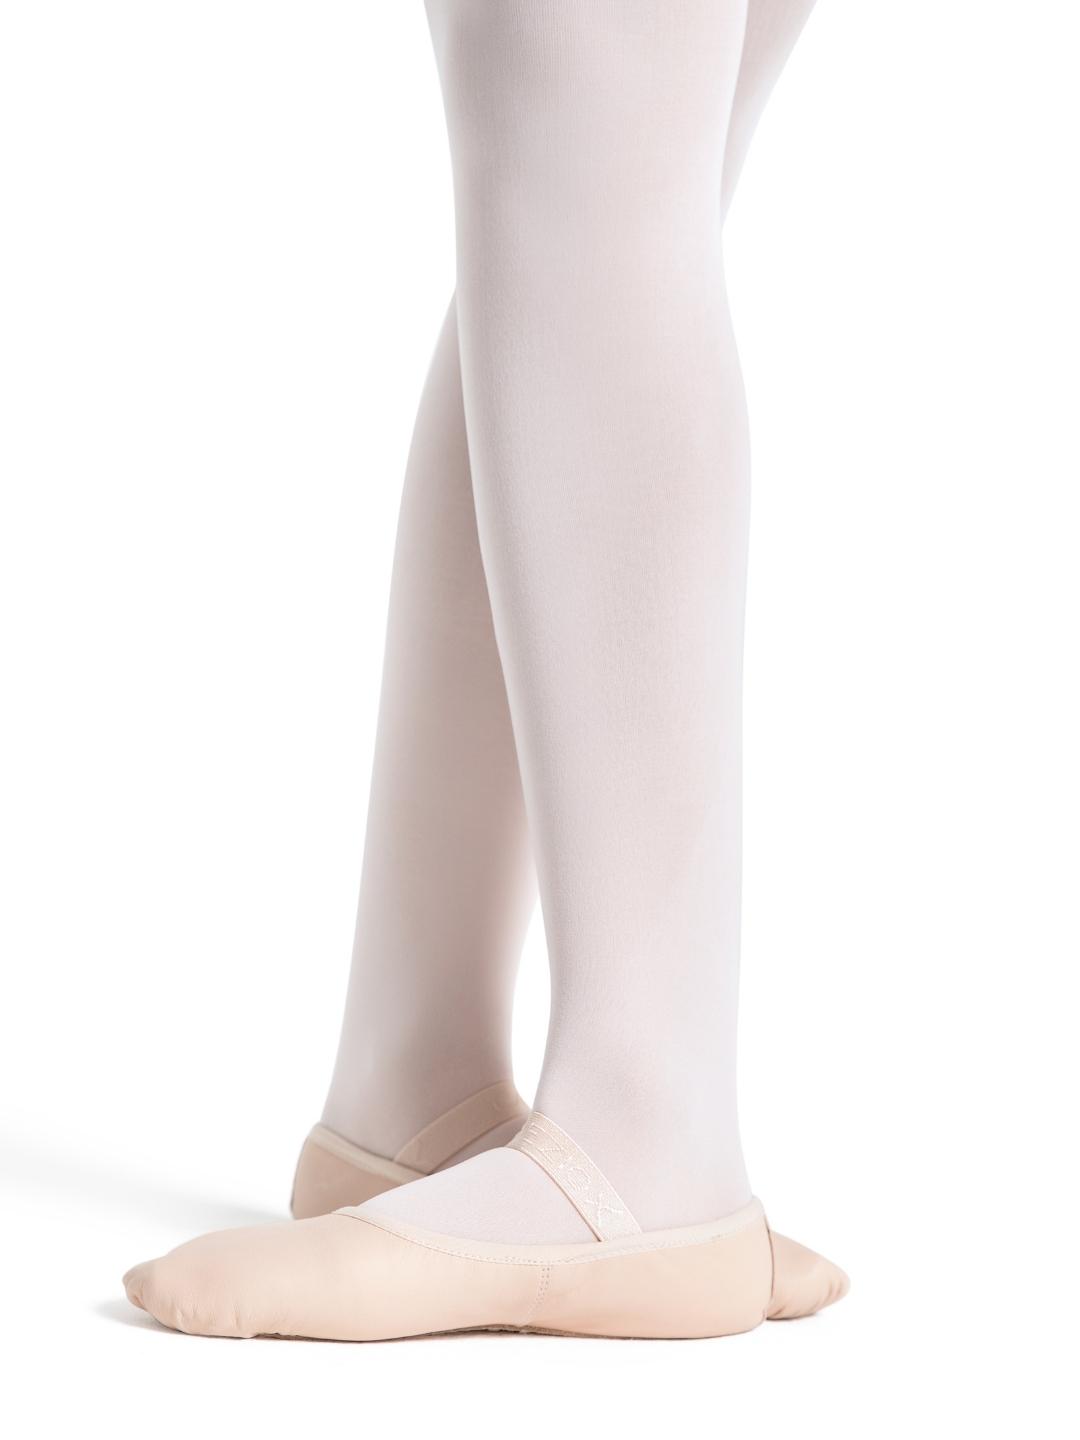 Womens Ballet Slippers, Full Sole, No Lace Up